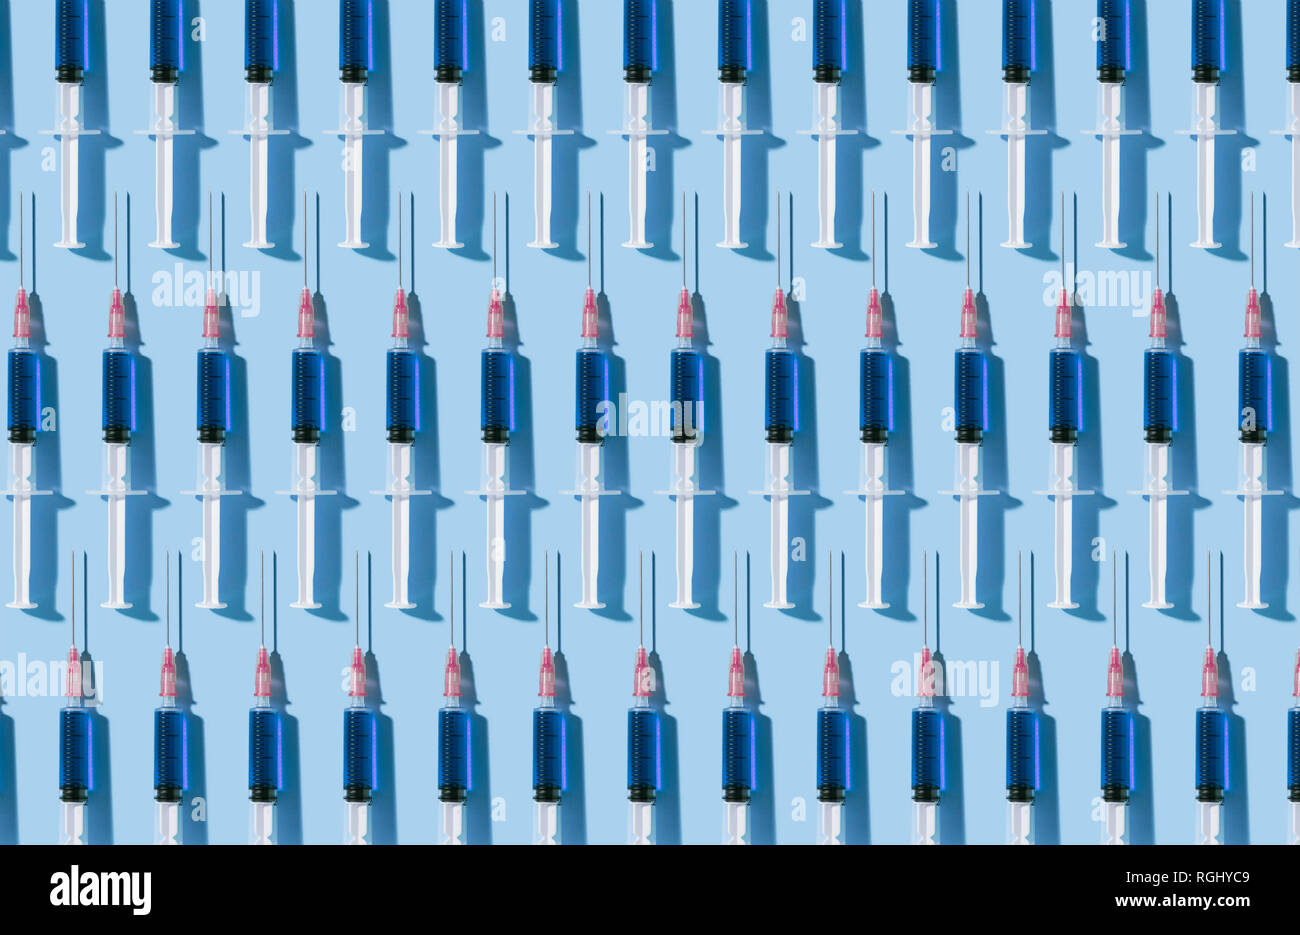 Multiple syringes organized in a pattern over blue background Stock Photo